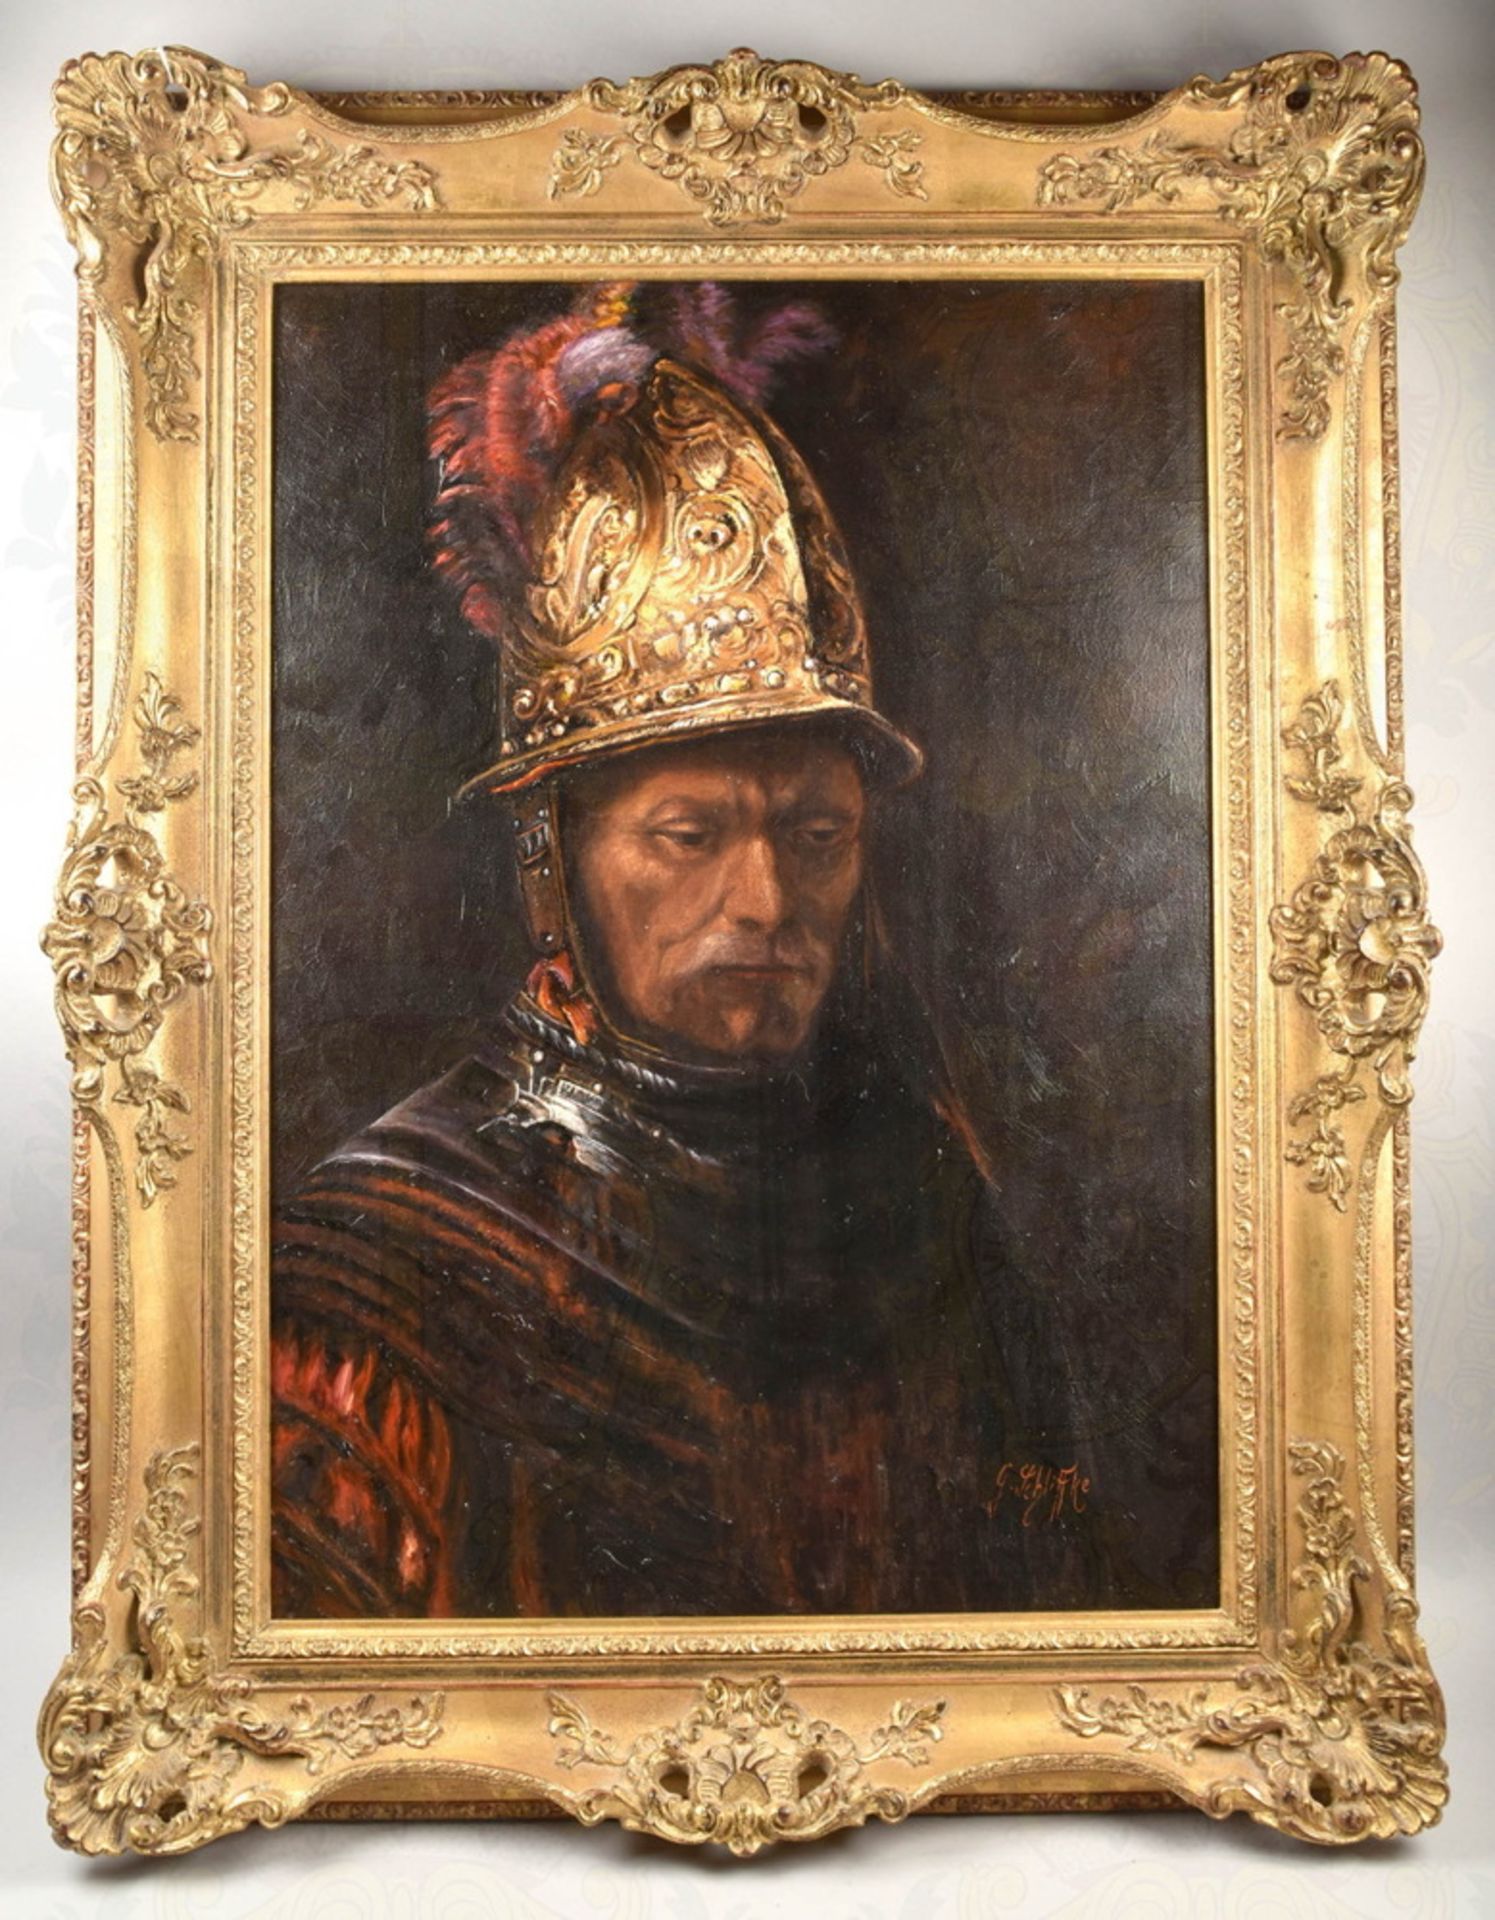 Oil painting the Man with the Golden Helmet